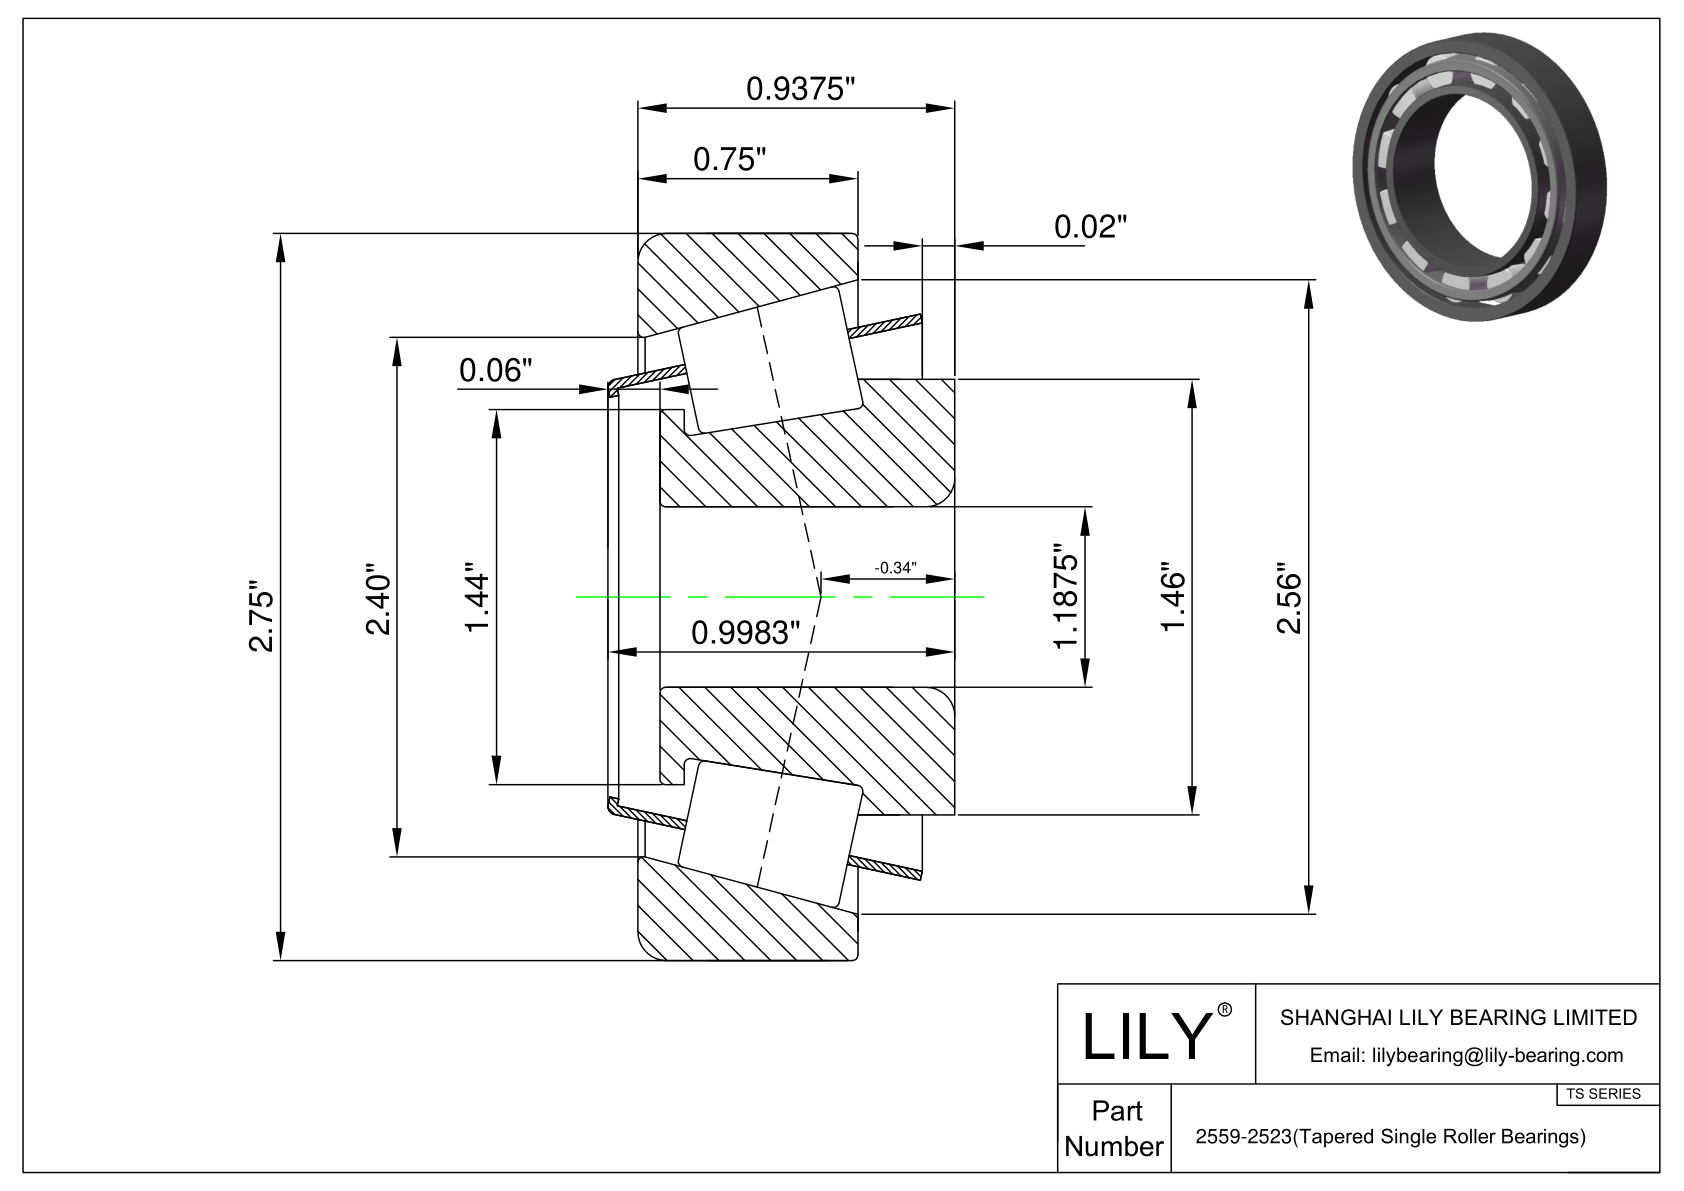 2559-2523 TS (Tapered Single Roller Bearings) (Imperial) cad drawing